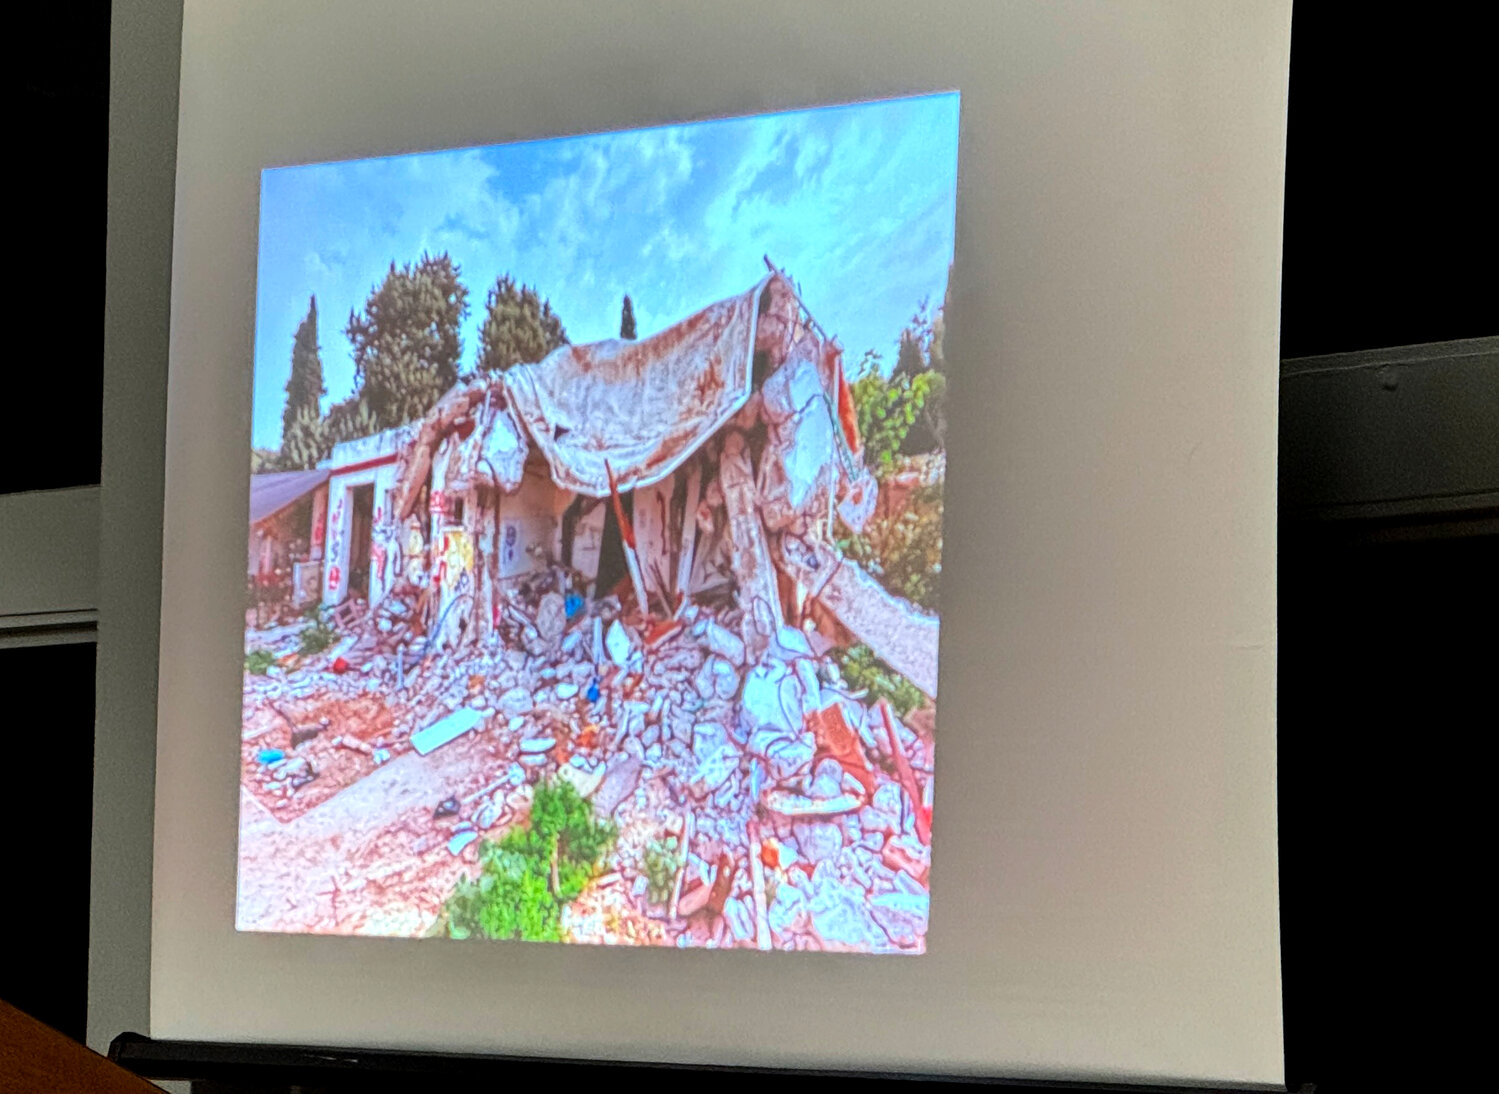 David Sussman showed images of homes burned to the ground — many that had people still inside them.